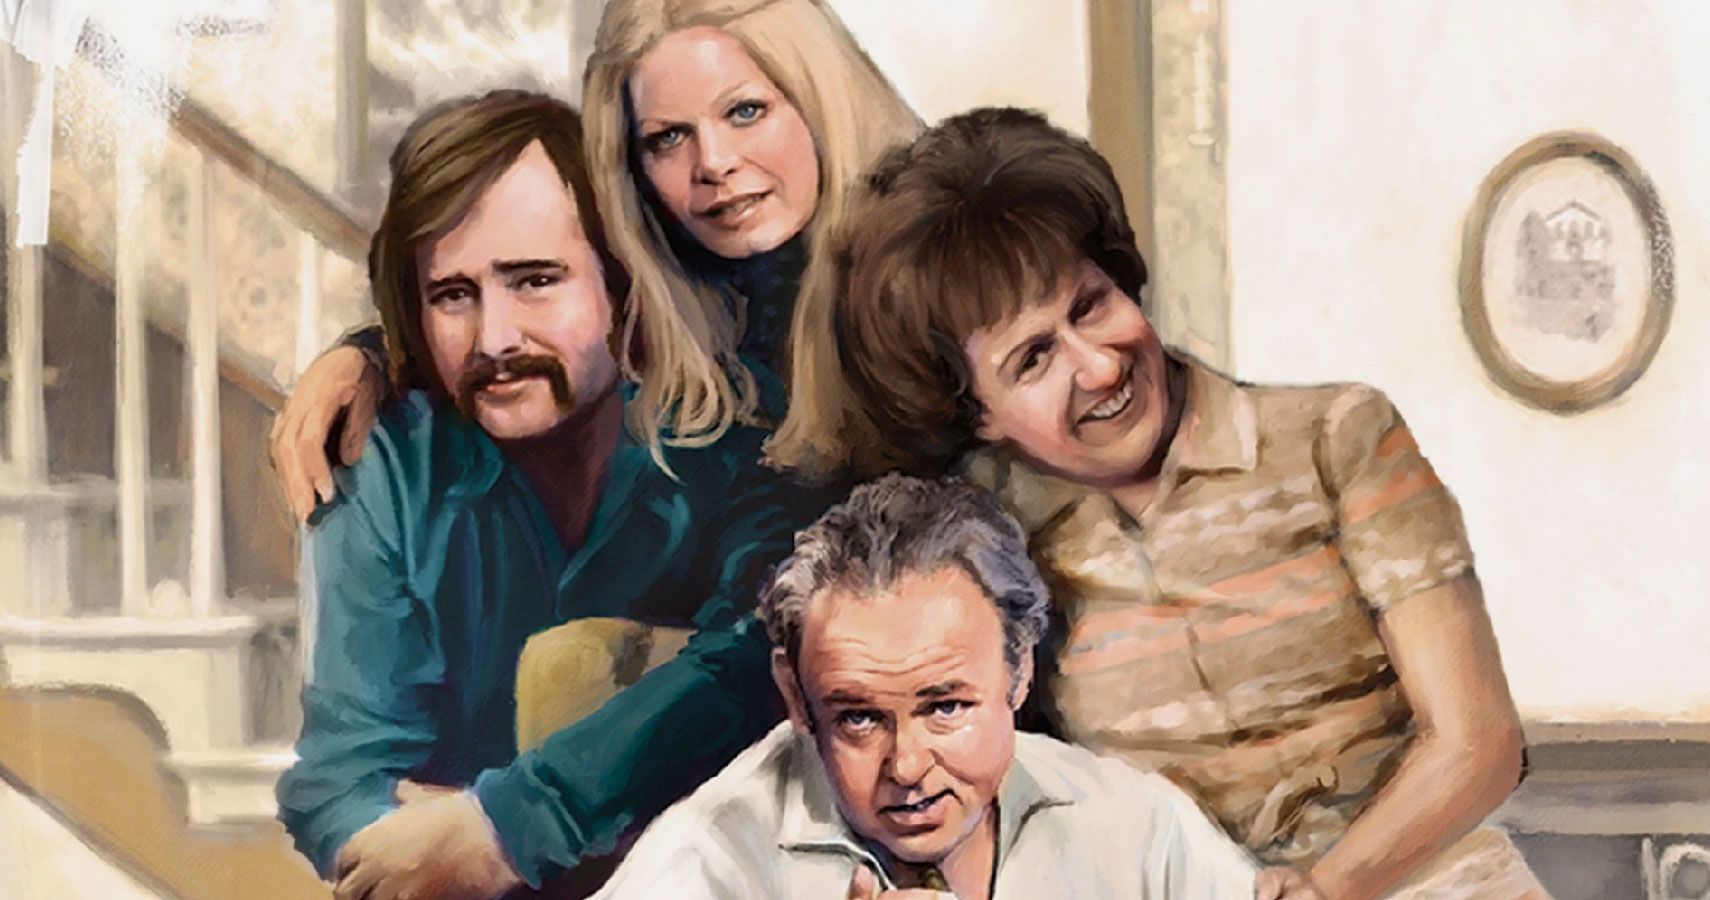 All in the Family: The Complete Series